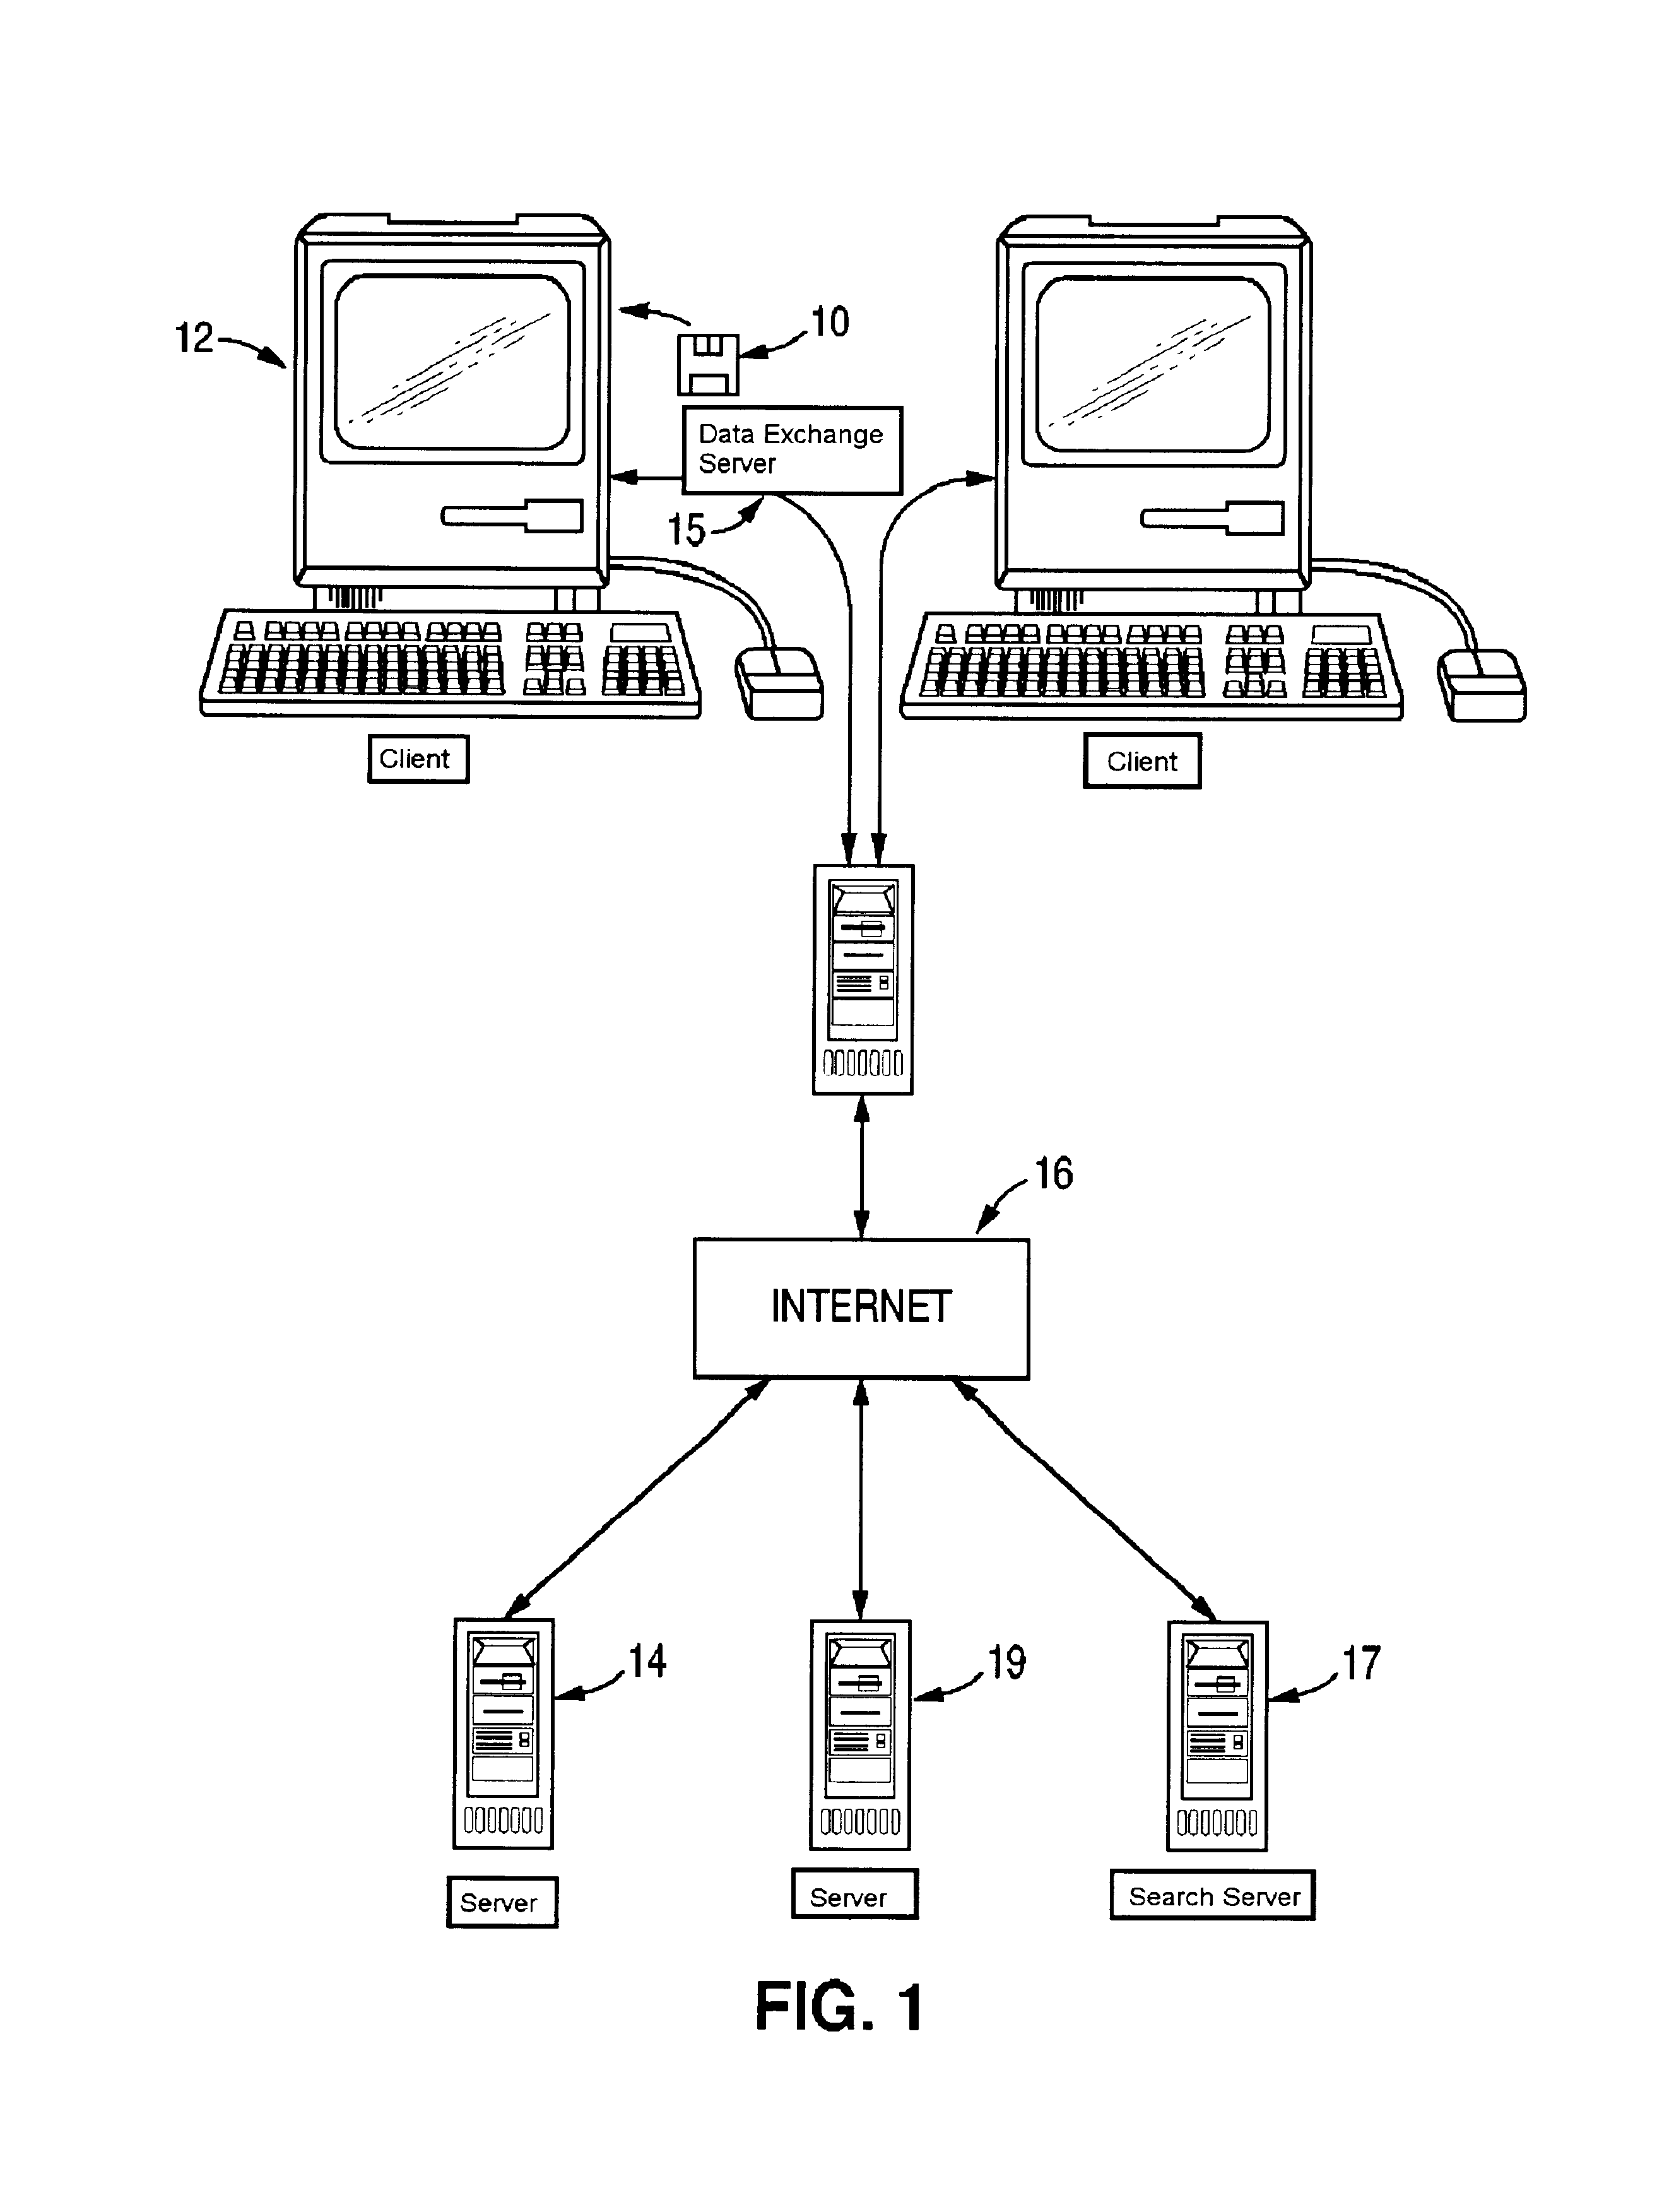 Method and apparatus for simultaneously accessing a plurality of dispersed databases